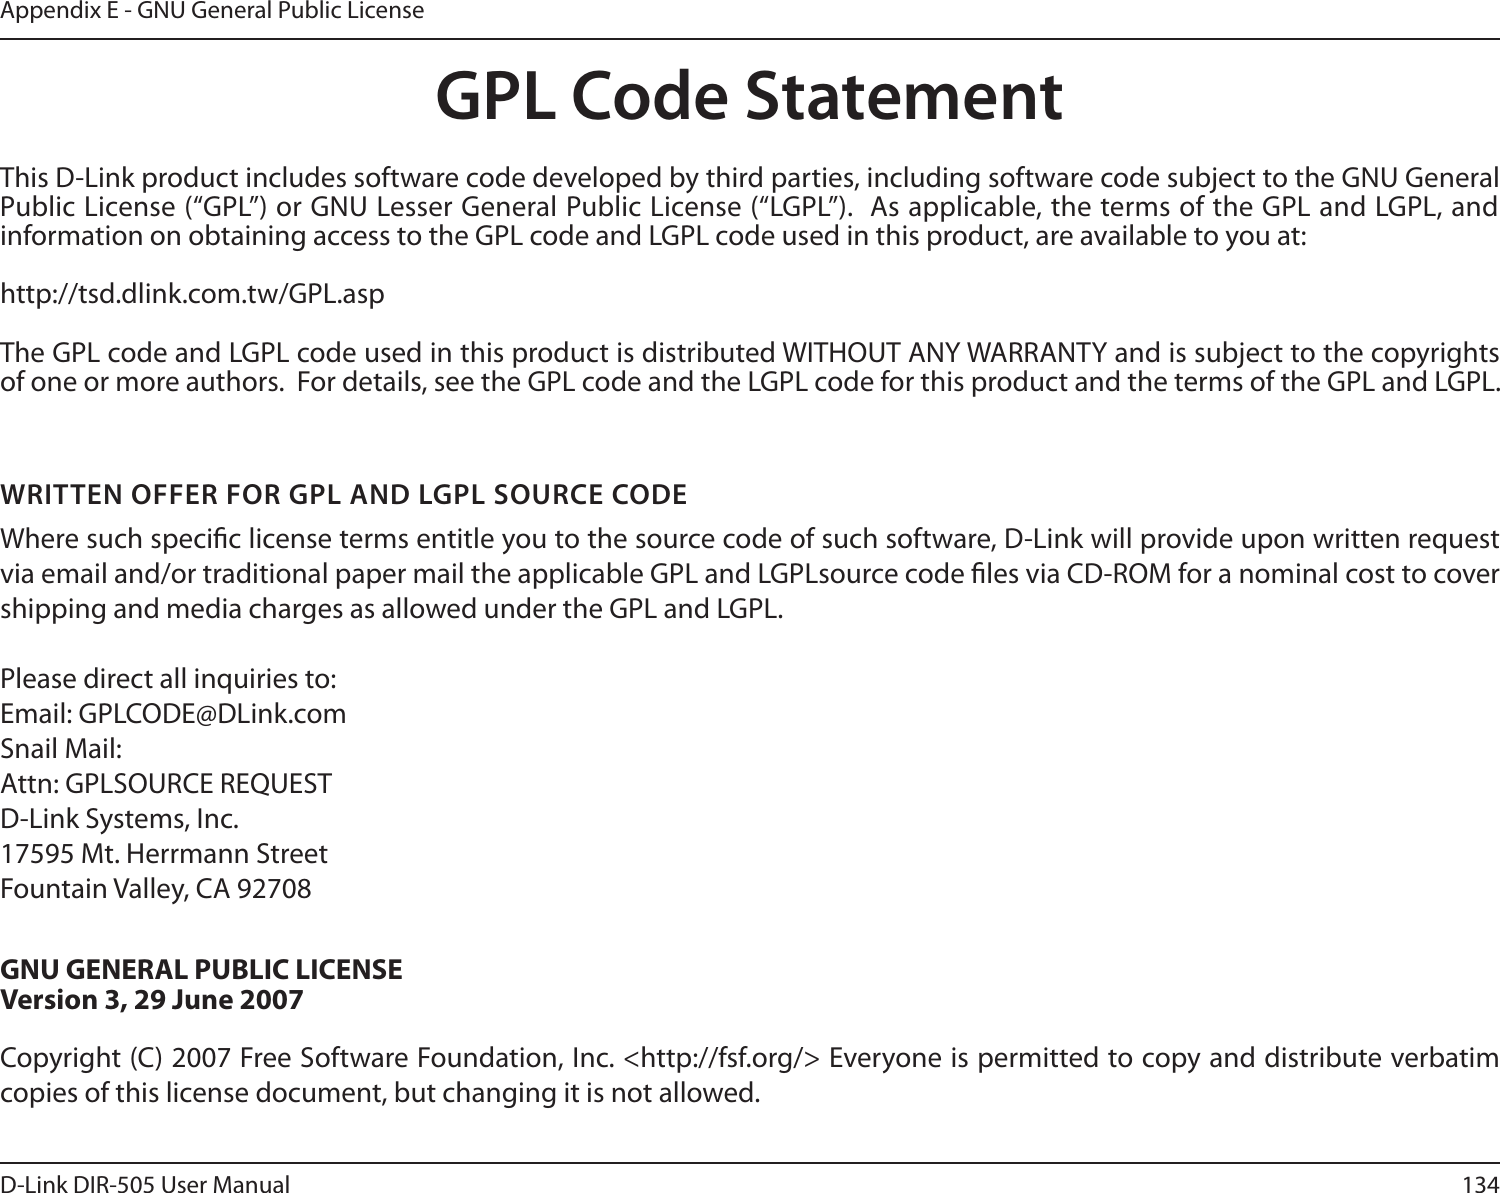 134D-Link DIR-505 User ManualAppendix E - GNU General Public LicenseGPL Code StatementThis D-Link product includes software code developed by third parties, including software code subject to the GNU General Public License (“GPL”) or GNU Lesser General Public License (“LGPL”).  As applicable, the terms of the GPL and LGPL, and information on obtaining access to the GPL code and LGPL code used in this product, are available to you at:http://tsd.dlink.com.tw/GPL.aspThe GPL code and LGPL code used in this product is distributed WITHOUT ANY WARRANTY and is subject to the copyrights of one or more authors.  For details, see the GPL code and the LGPL code for this product and the terms of the GPL and LGPL.WRITTEN OFFER FOR GPL AND LGPL SOURCE CODEWhere such specic license terms entitle you to the source code of such software, D-Link will provide upon written request via email and/or traditional paper mail the applicable GPL and LGPLsource code les via CD-ROM for a nominal cost to cover shipping and media charges as allowed under the GPL and LGPL.  Please direct all inquiries to:Email: GPLCODE@DLink.comSnail Mail:Attn: GPLSOURCE REQUESTD-Link Systems, Inc.17595 Mt. Herrmann StreetFountain Valley, CA 92708GNU GENERAL PUBLIC LICENSEVersion 3, 29 June 2007Copyright (C) 2007 Free Software Foundation, Inc. &lt;http://fsf.org/&gt; Everyone is permitted to copy and distribute verbatim copies of this license document, but changing it is not allowed.